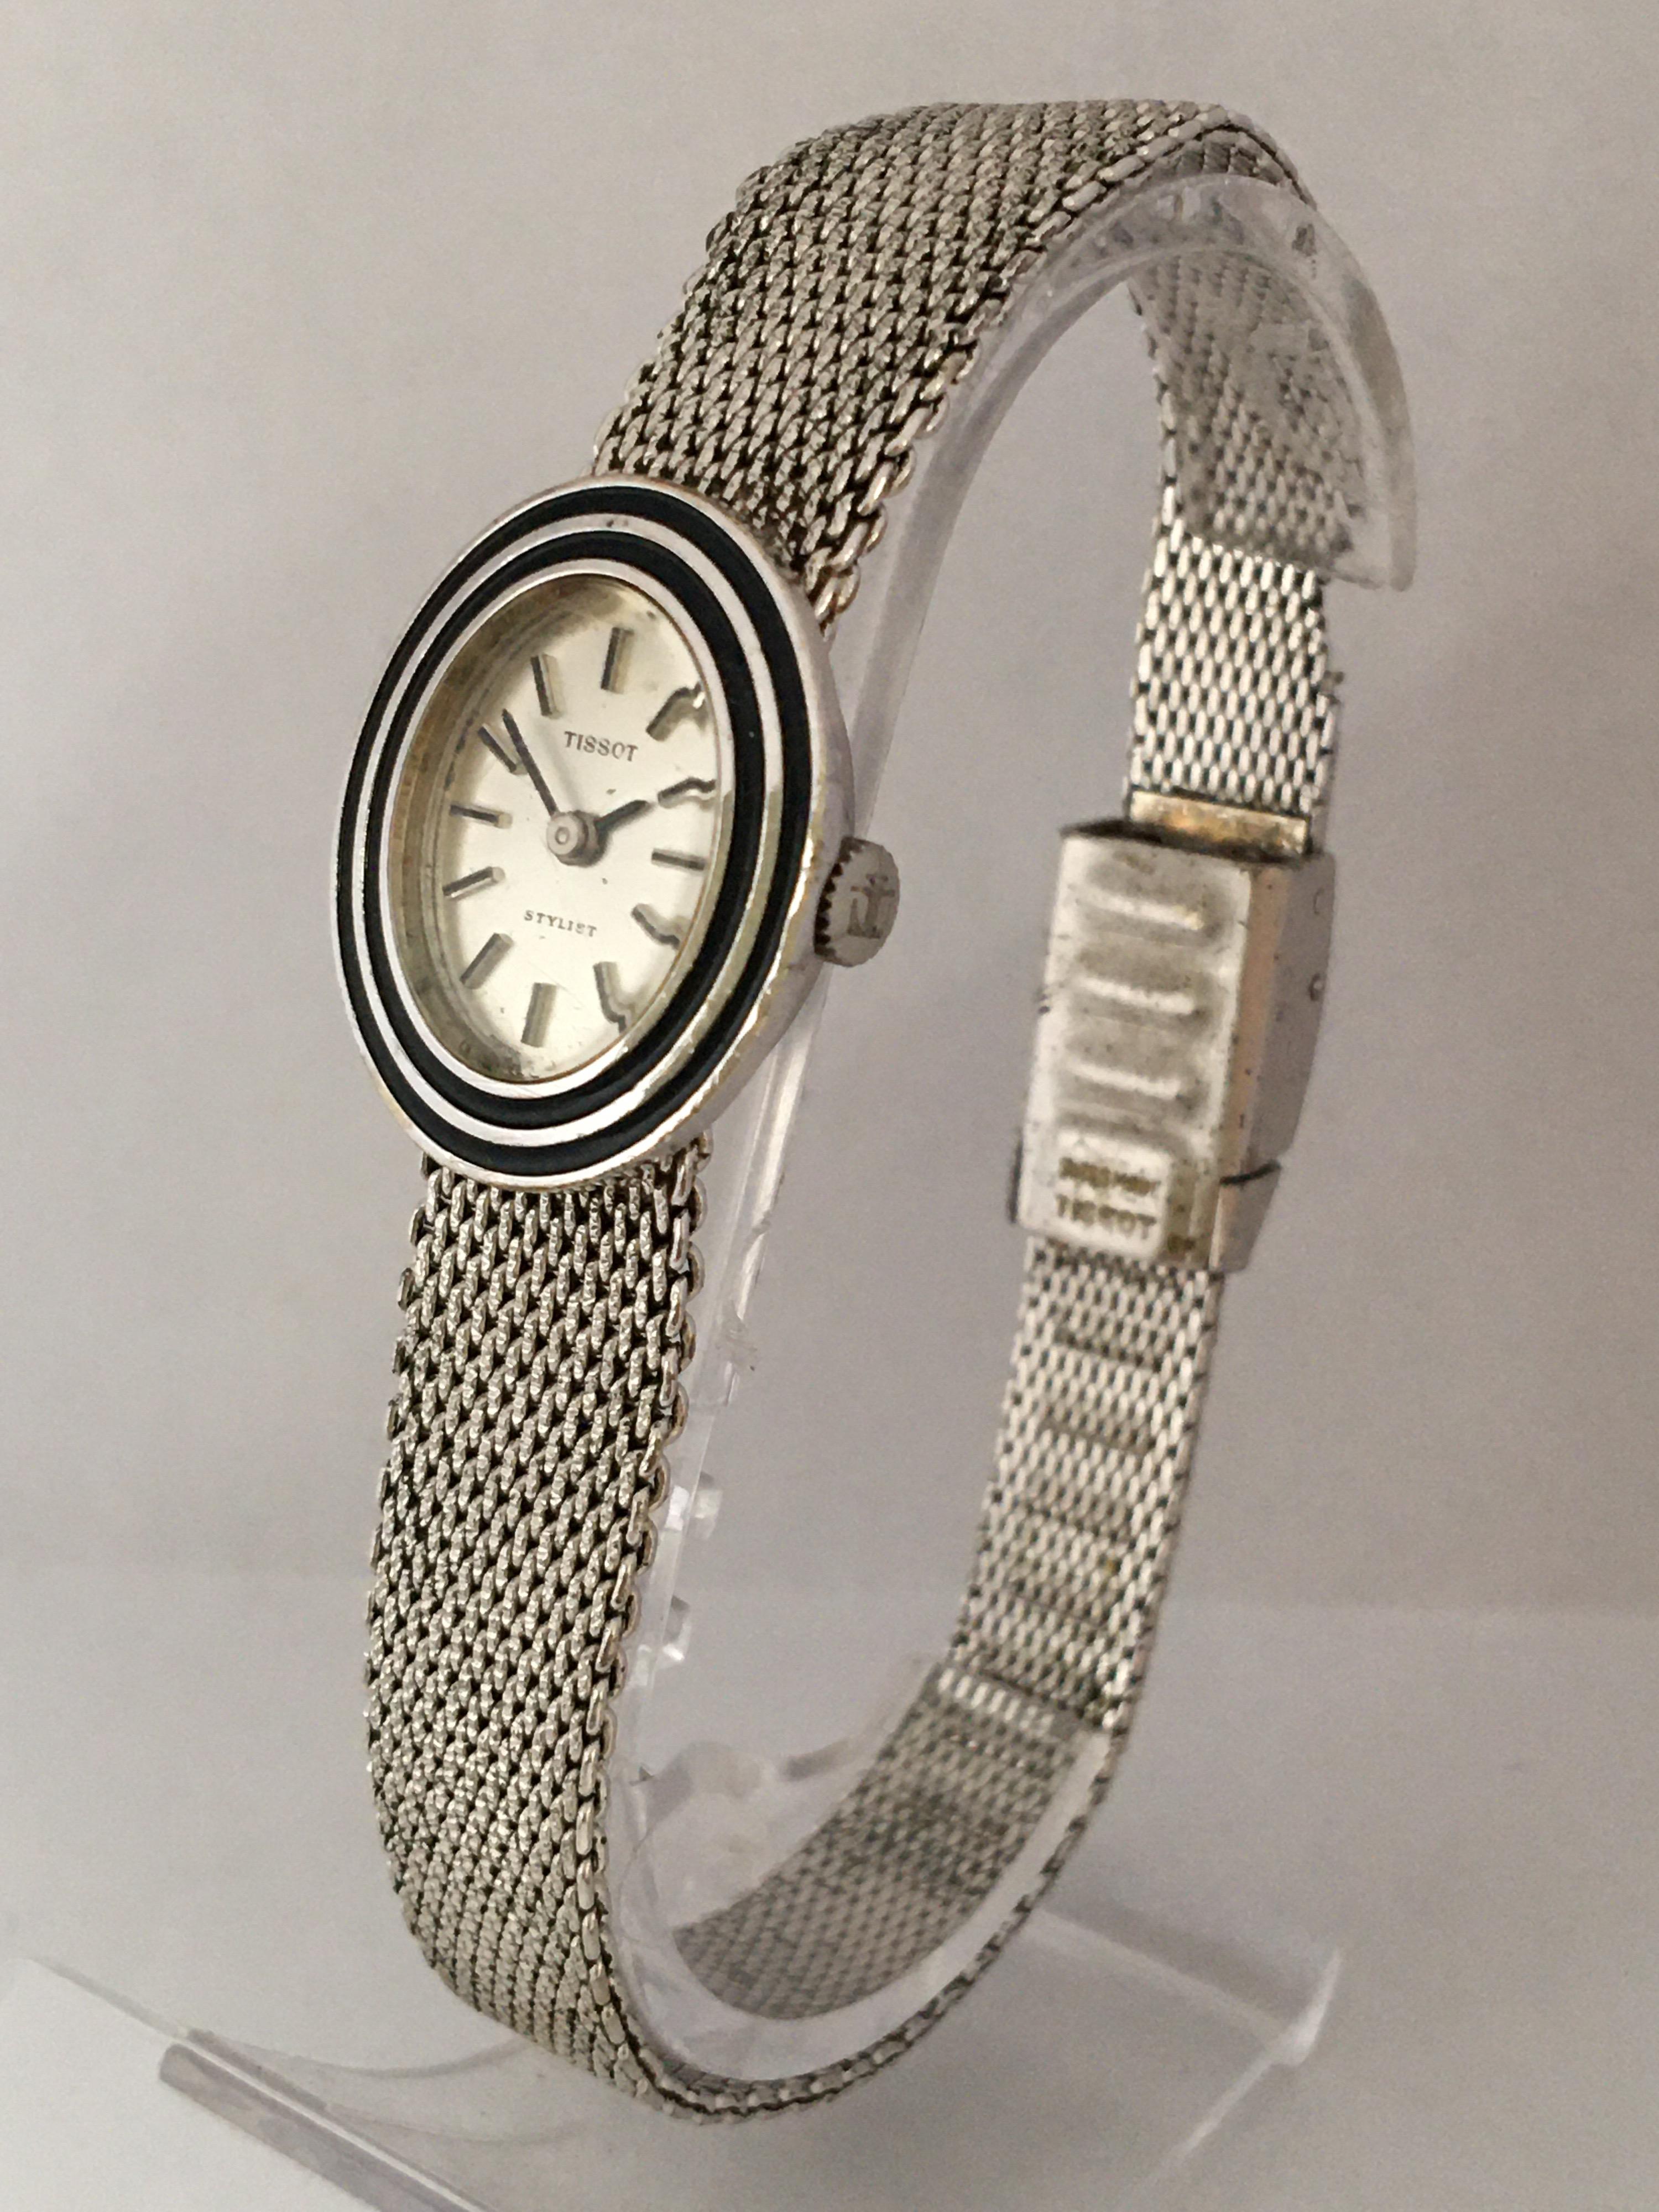 This vintage pre-owned hand-winding watch is working and it is ticking well. 

There are some signs of ageing and wear some scratches on the watch case. The silver plated band is tarnished as shown. 

Please study the images carefully as form part